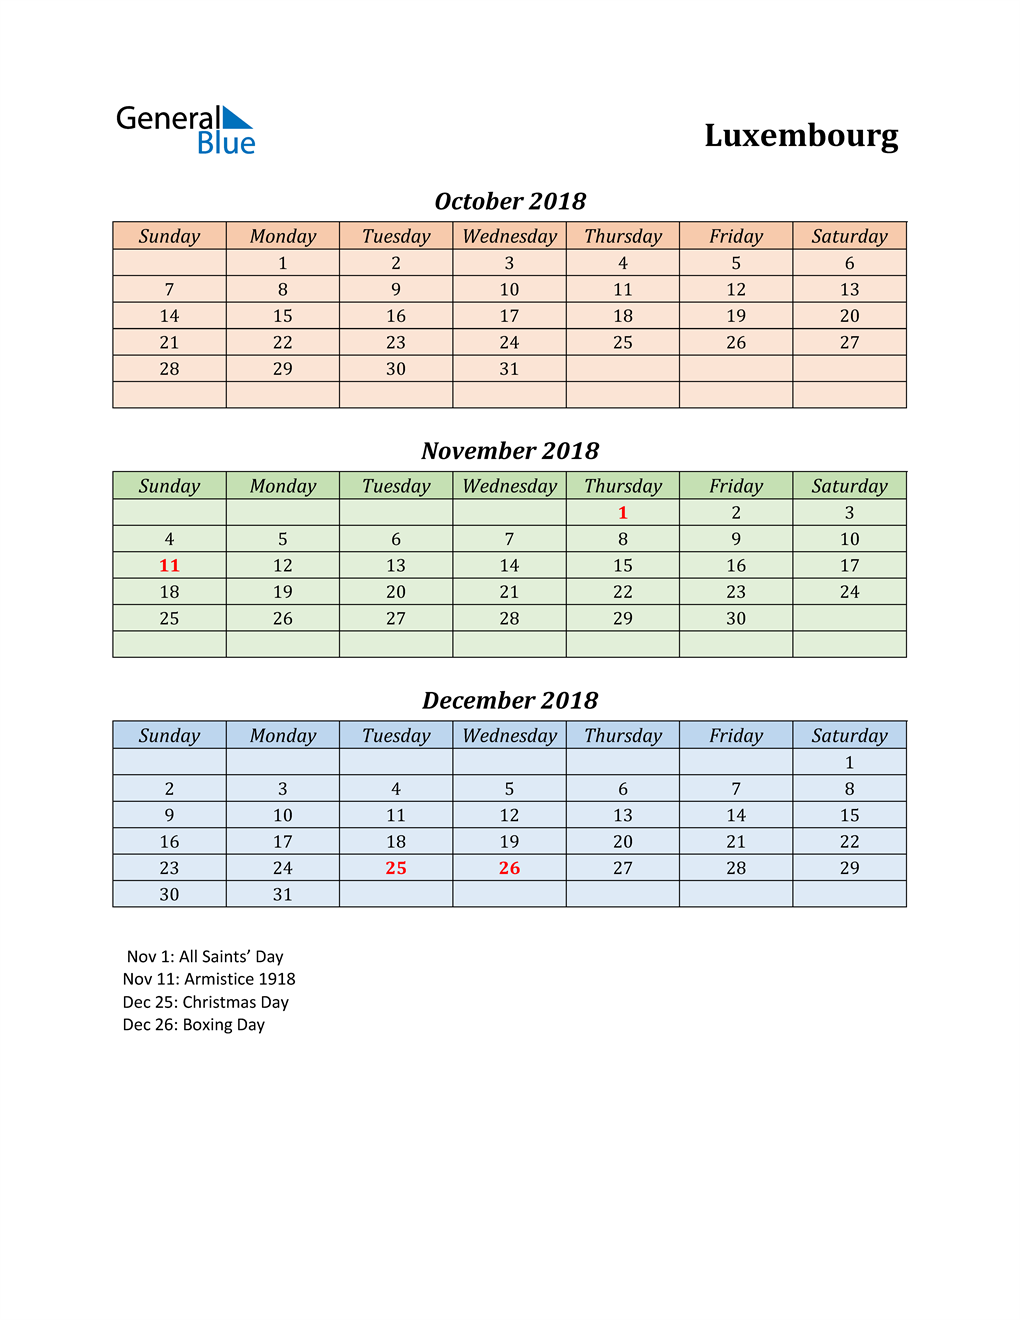  Q4 2018 Holiday Calendar - Luxembourg